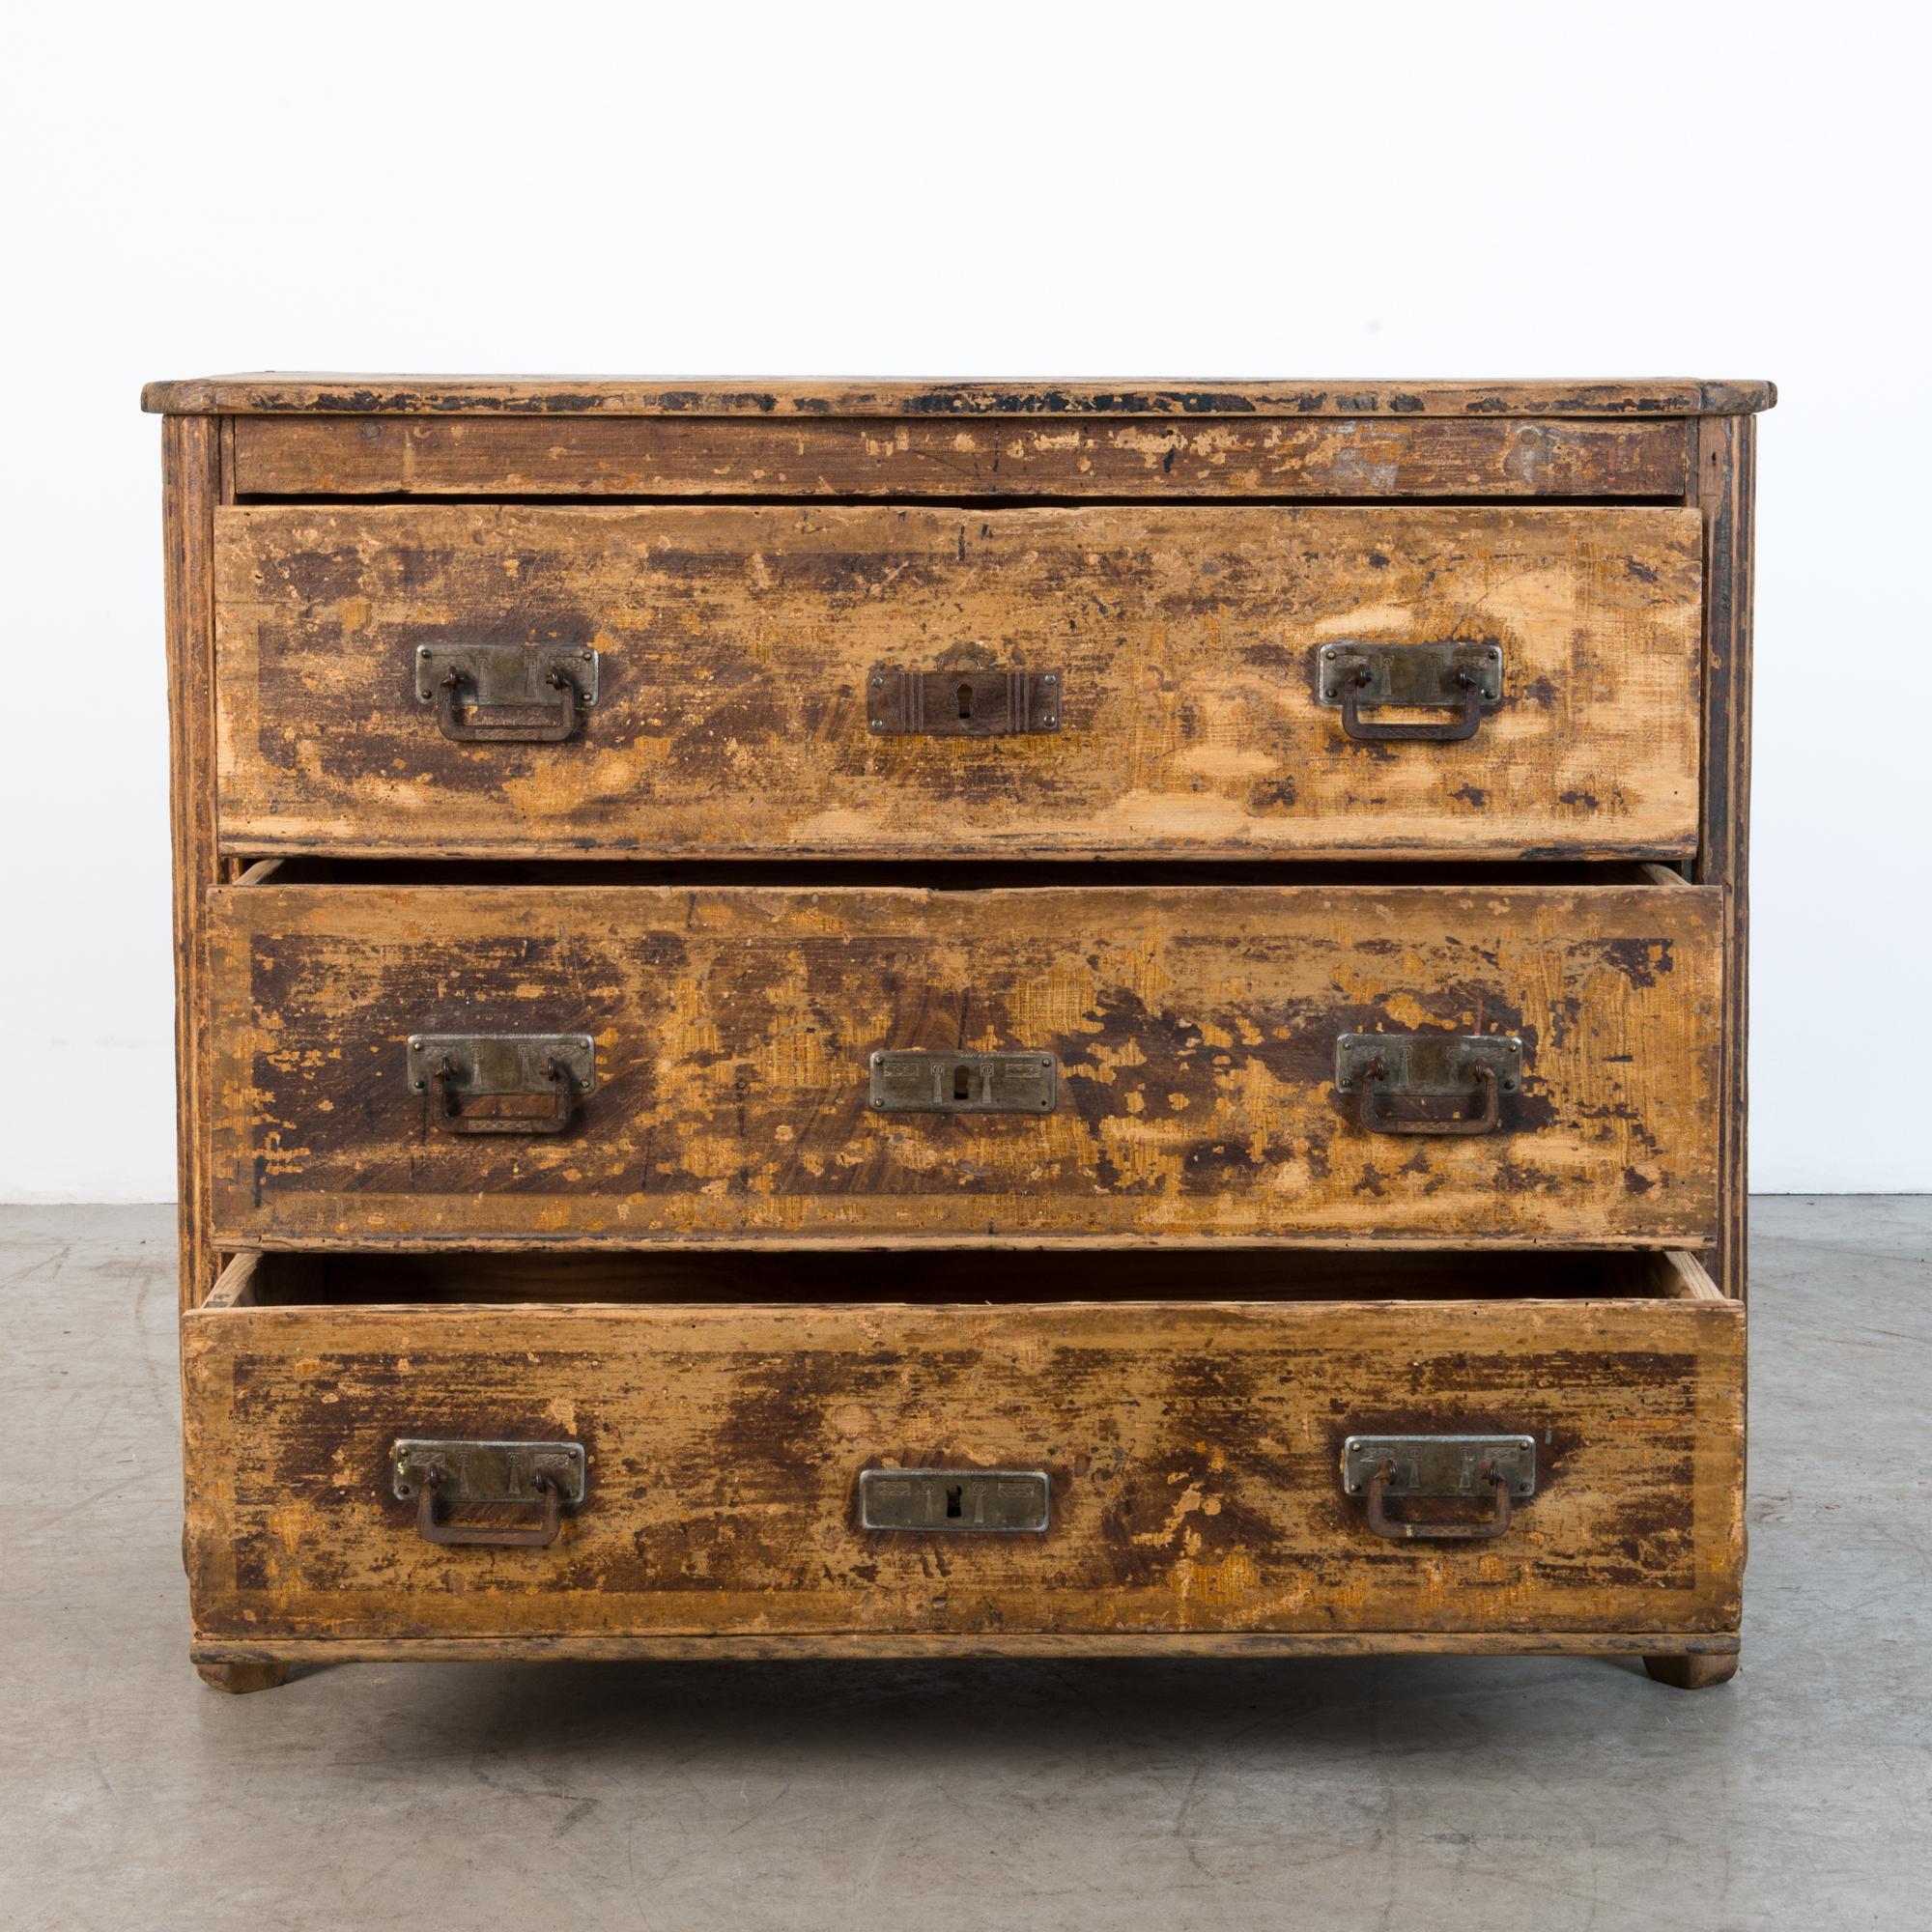 This chest of drawers is from late 19th century, Germany. A thick patina gives the pine surface a distinctive character. Original iron hardware features a geometric motif delicately incised with shallow relief, while bold rectangular plates emphasis